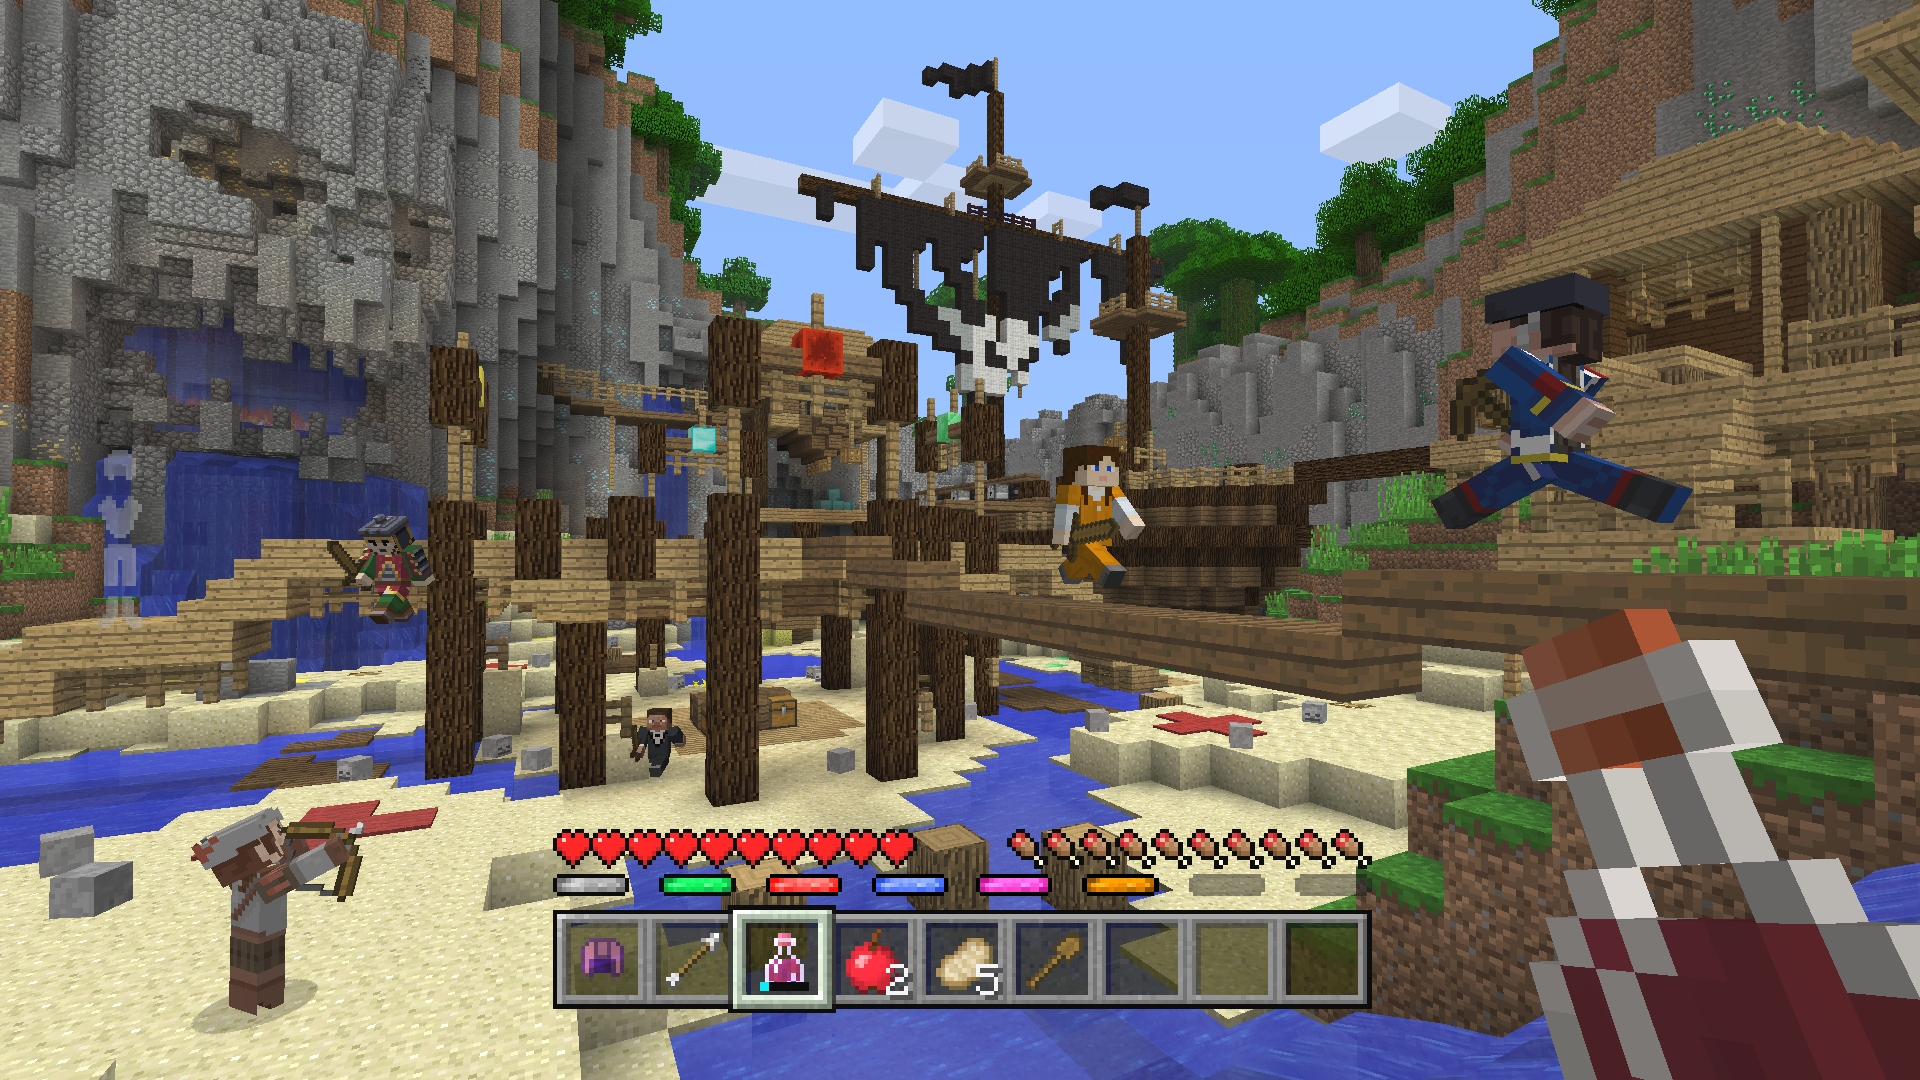 Minecraft Pocket Edition is about to go social with mobile rent-a